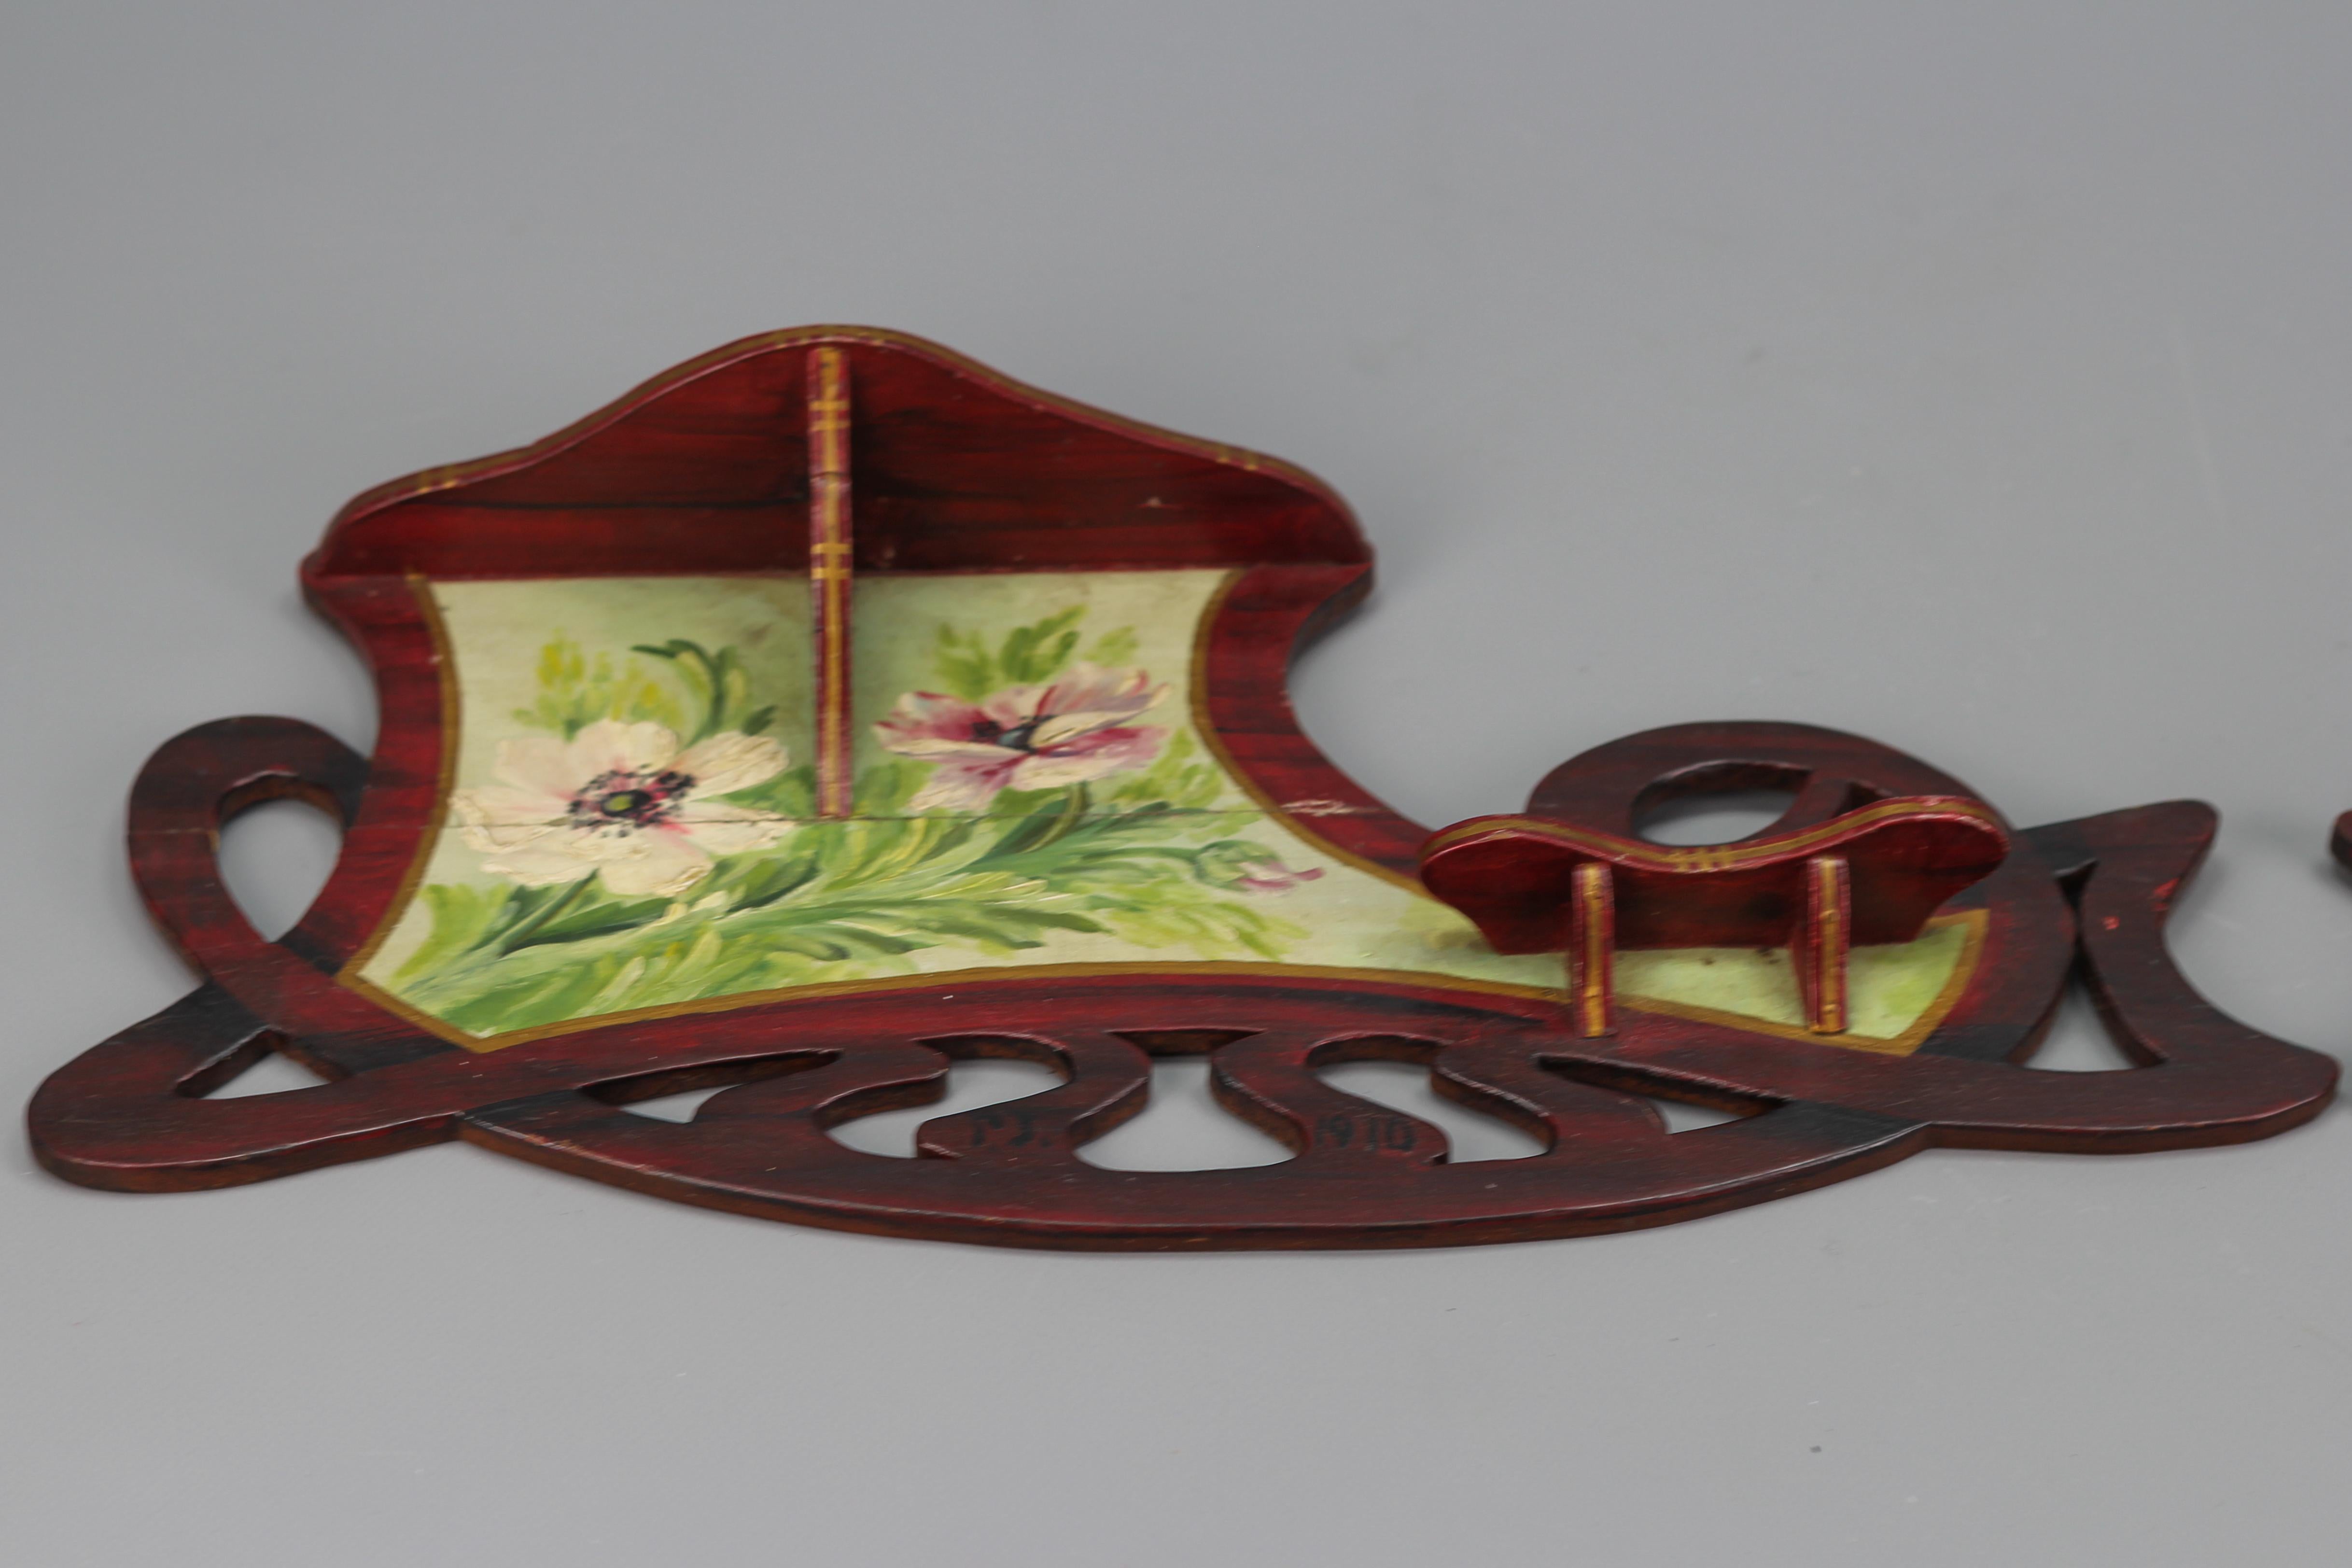 Pair of Art Nouveau Wooden Hand-Painted Floral Shelves, Germany, 1910 For Sale 6